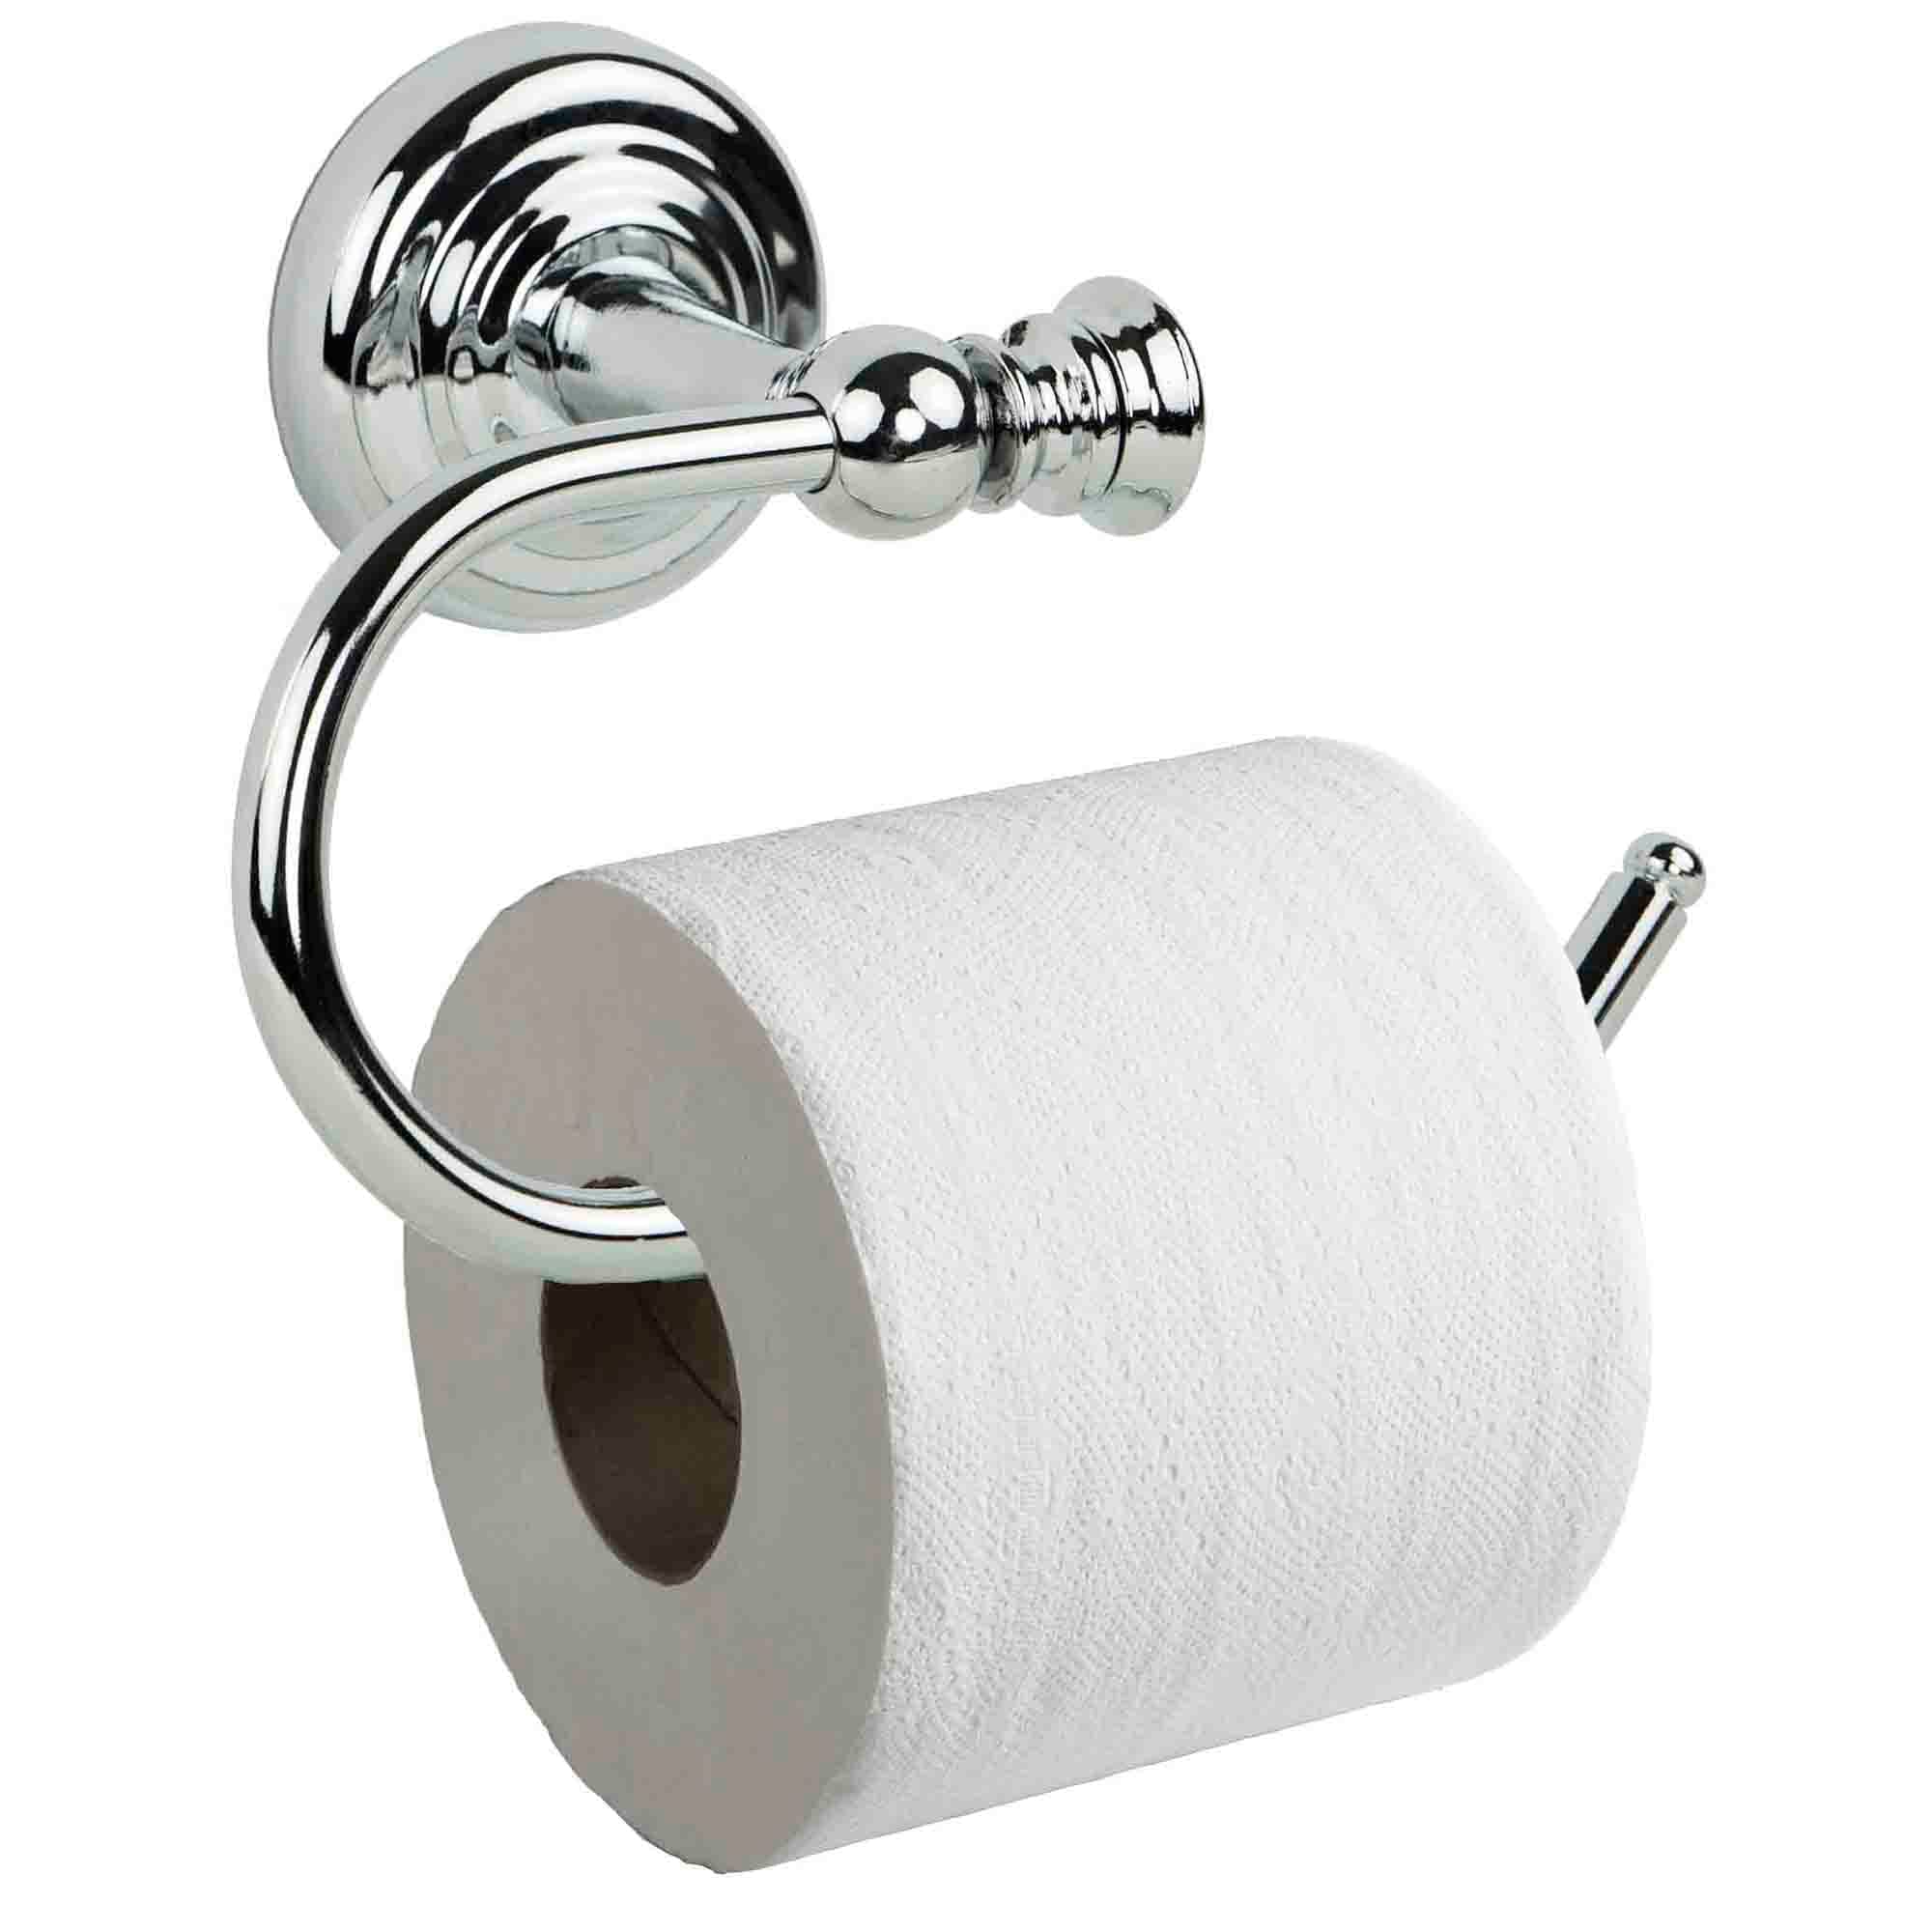 Home Basics Wall-Mounted Toilet Paper Holder $8.00 EACH, CASE PACK OF 12